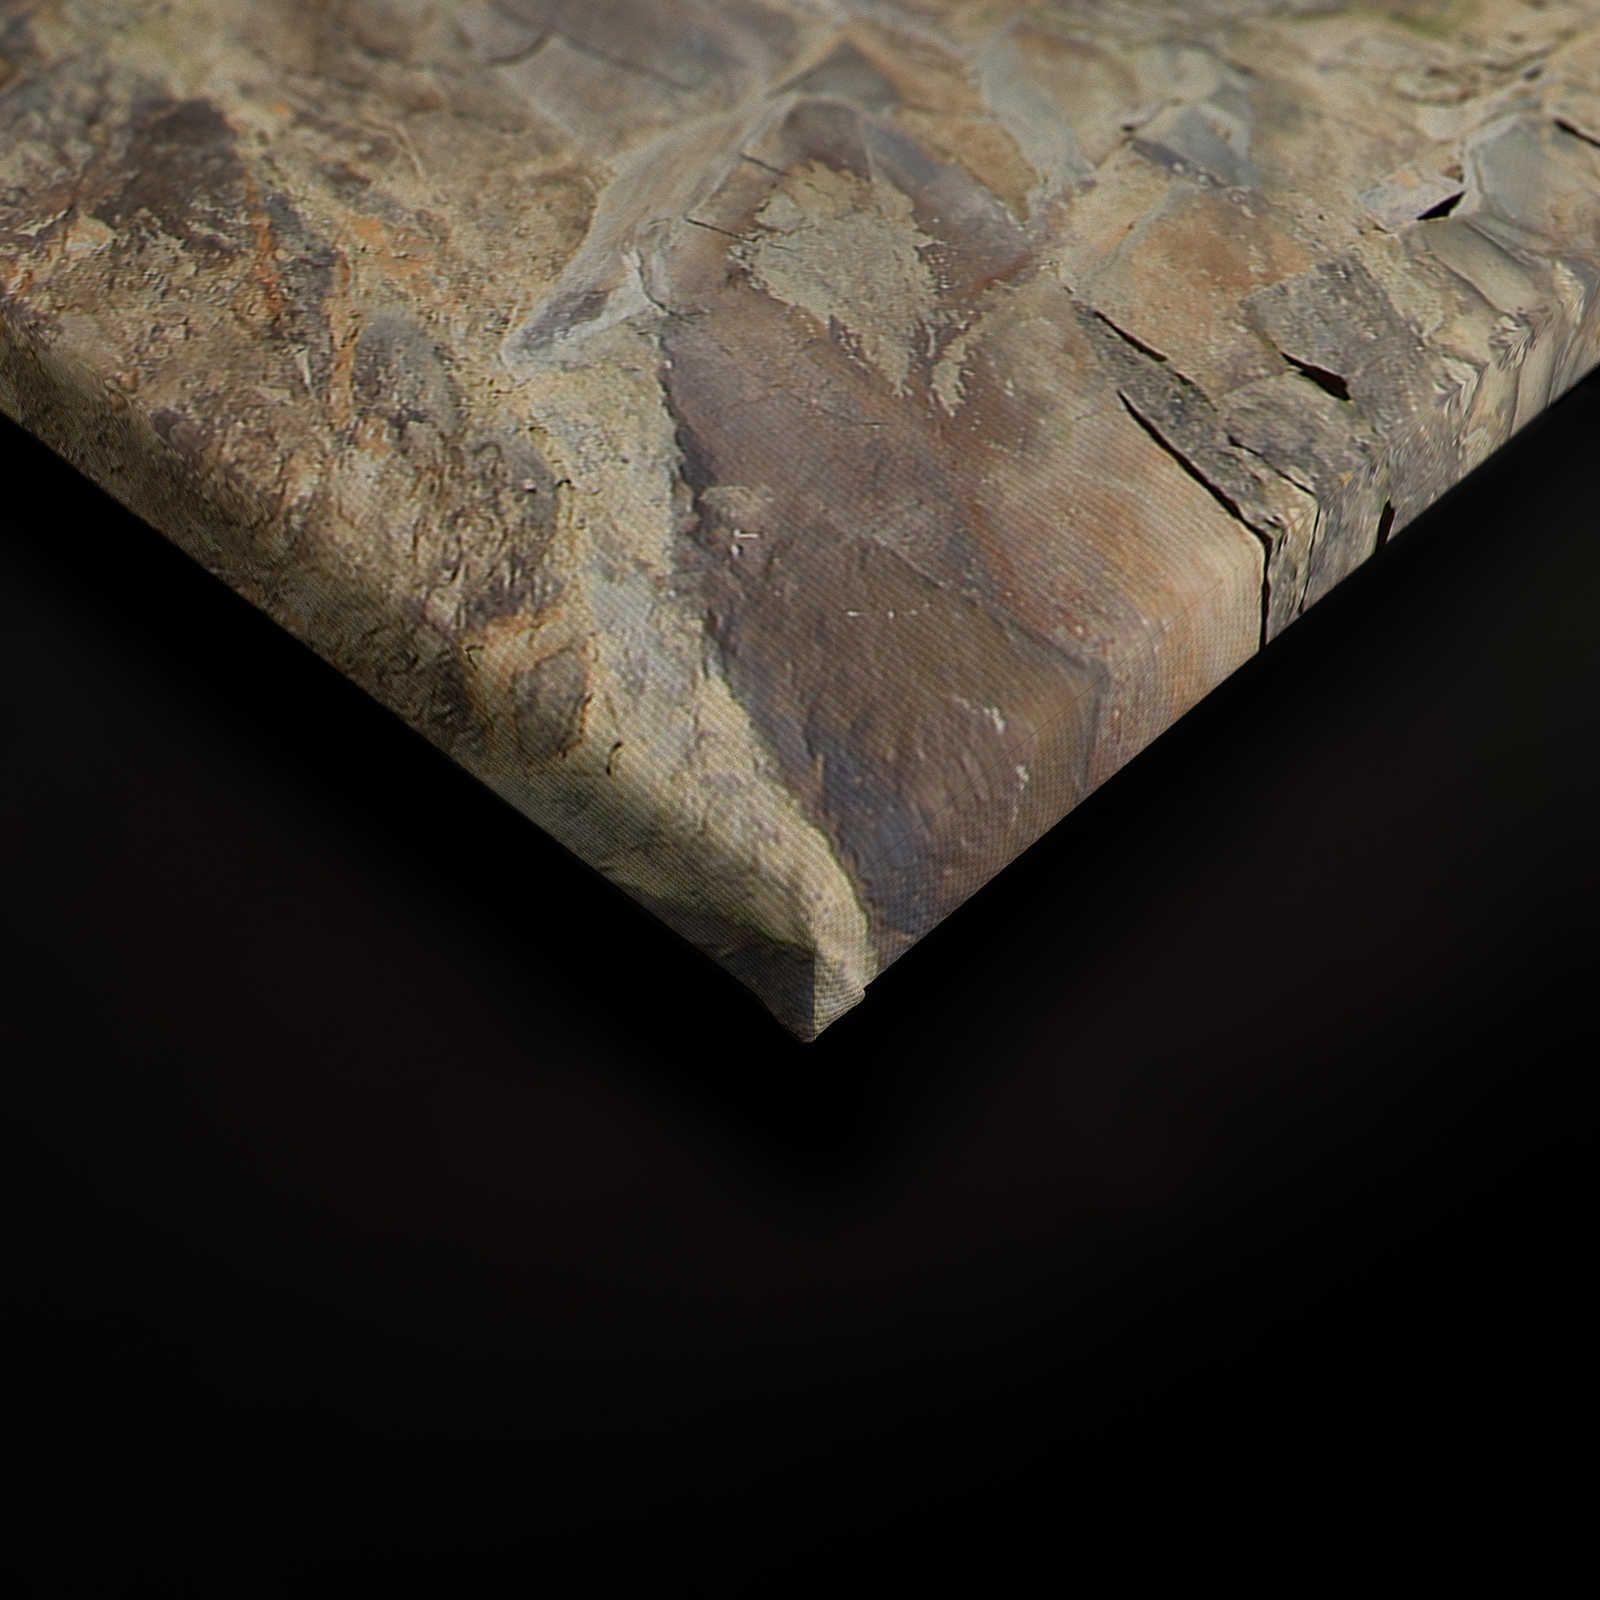             Canvas painting stone look 3D effect, natural stone wall - 0.90 m x 0.60 m
        